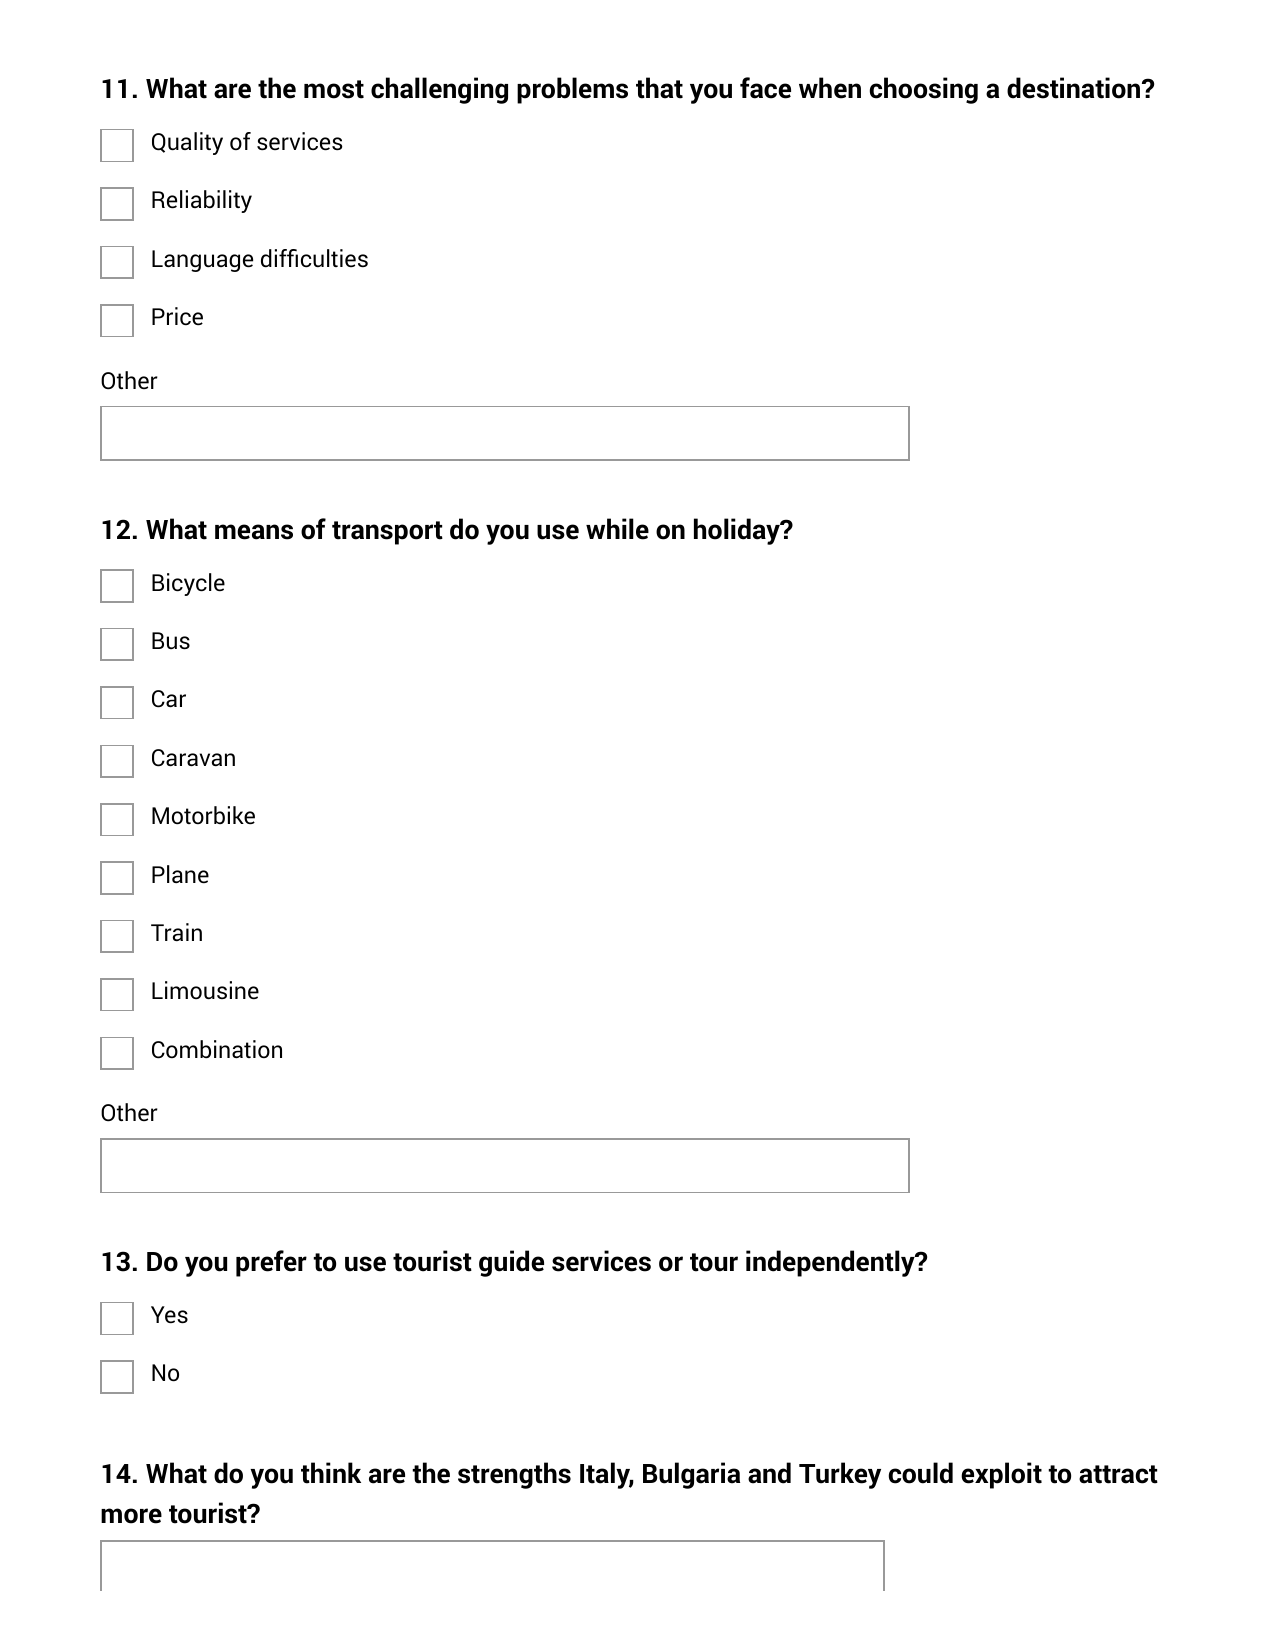 tourism related questionnaire